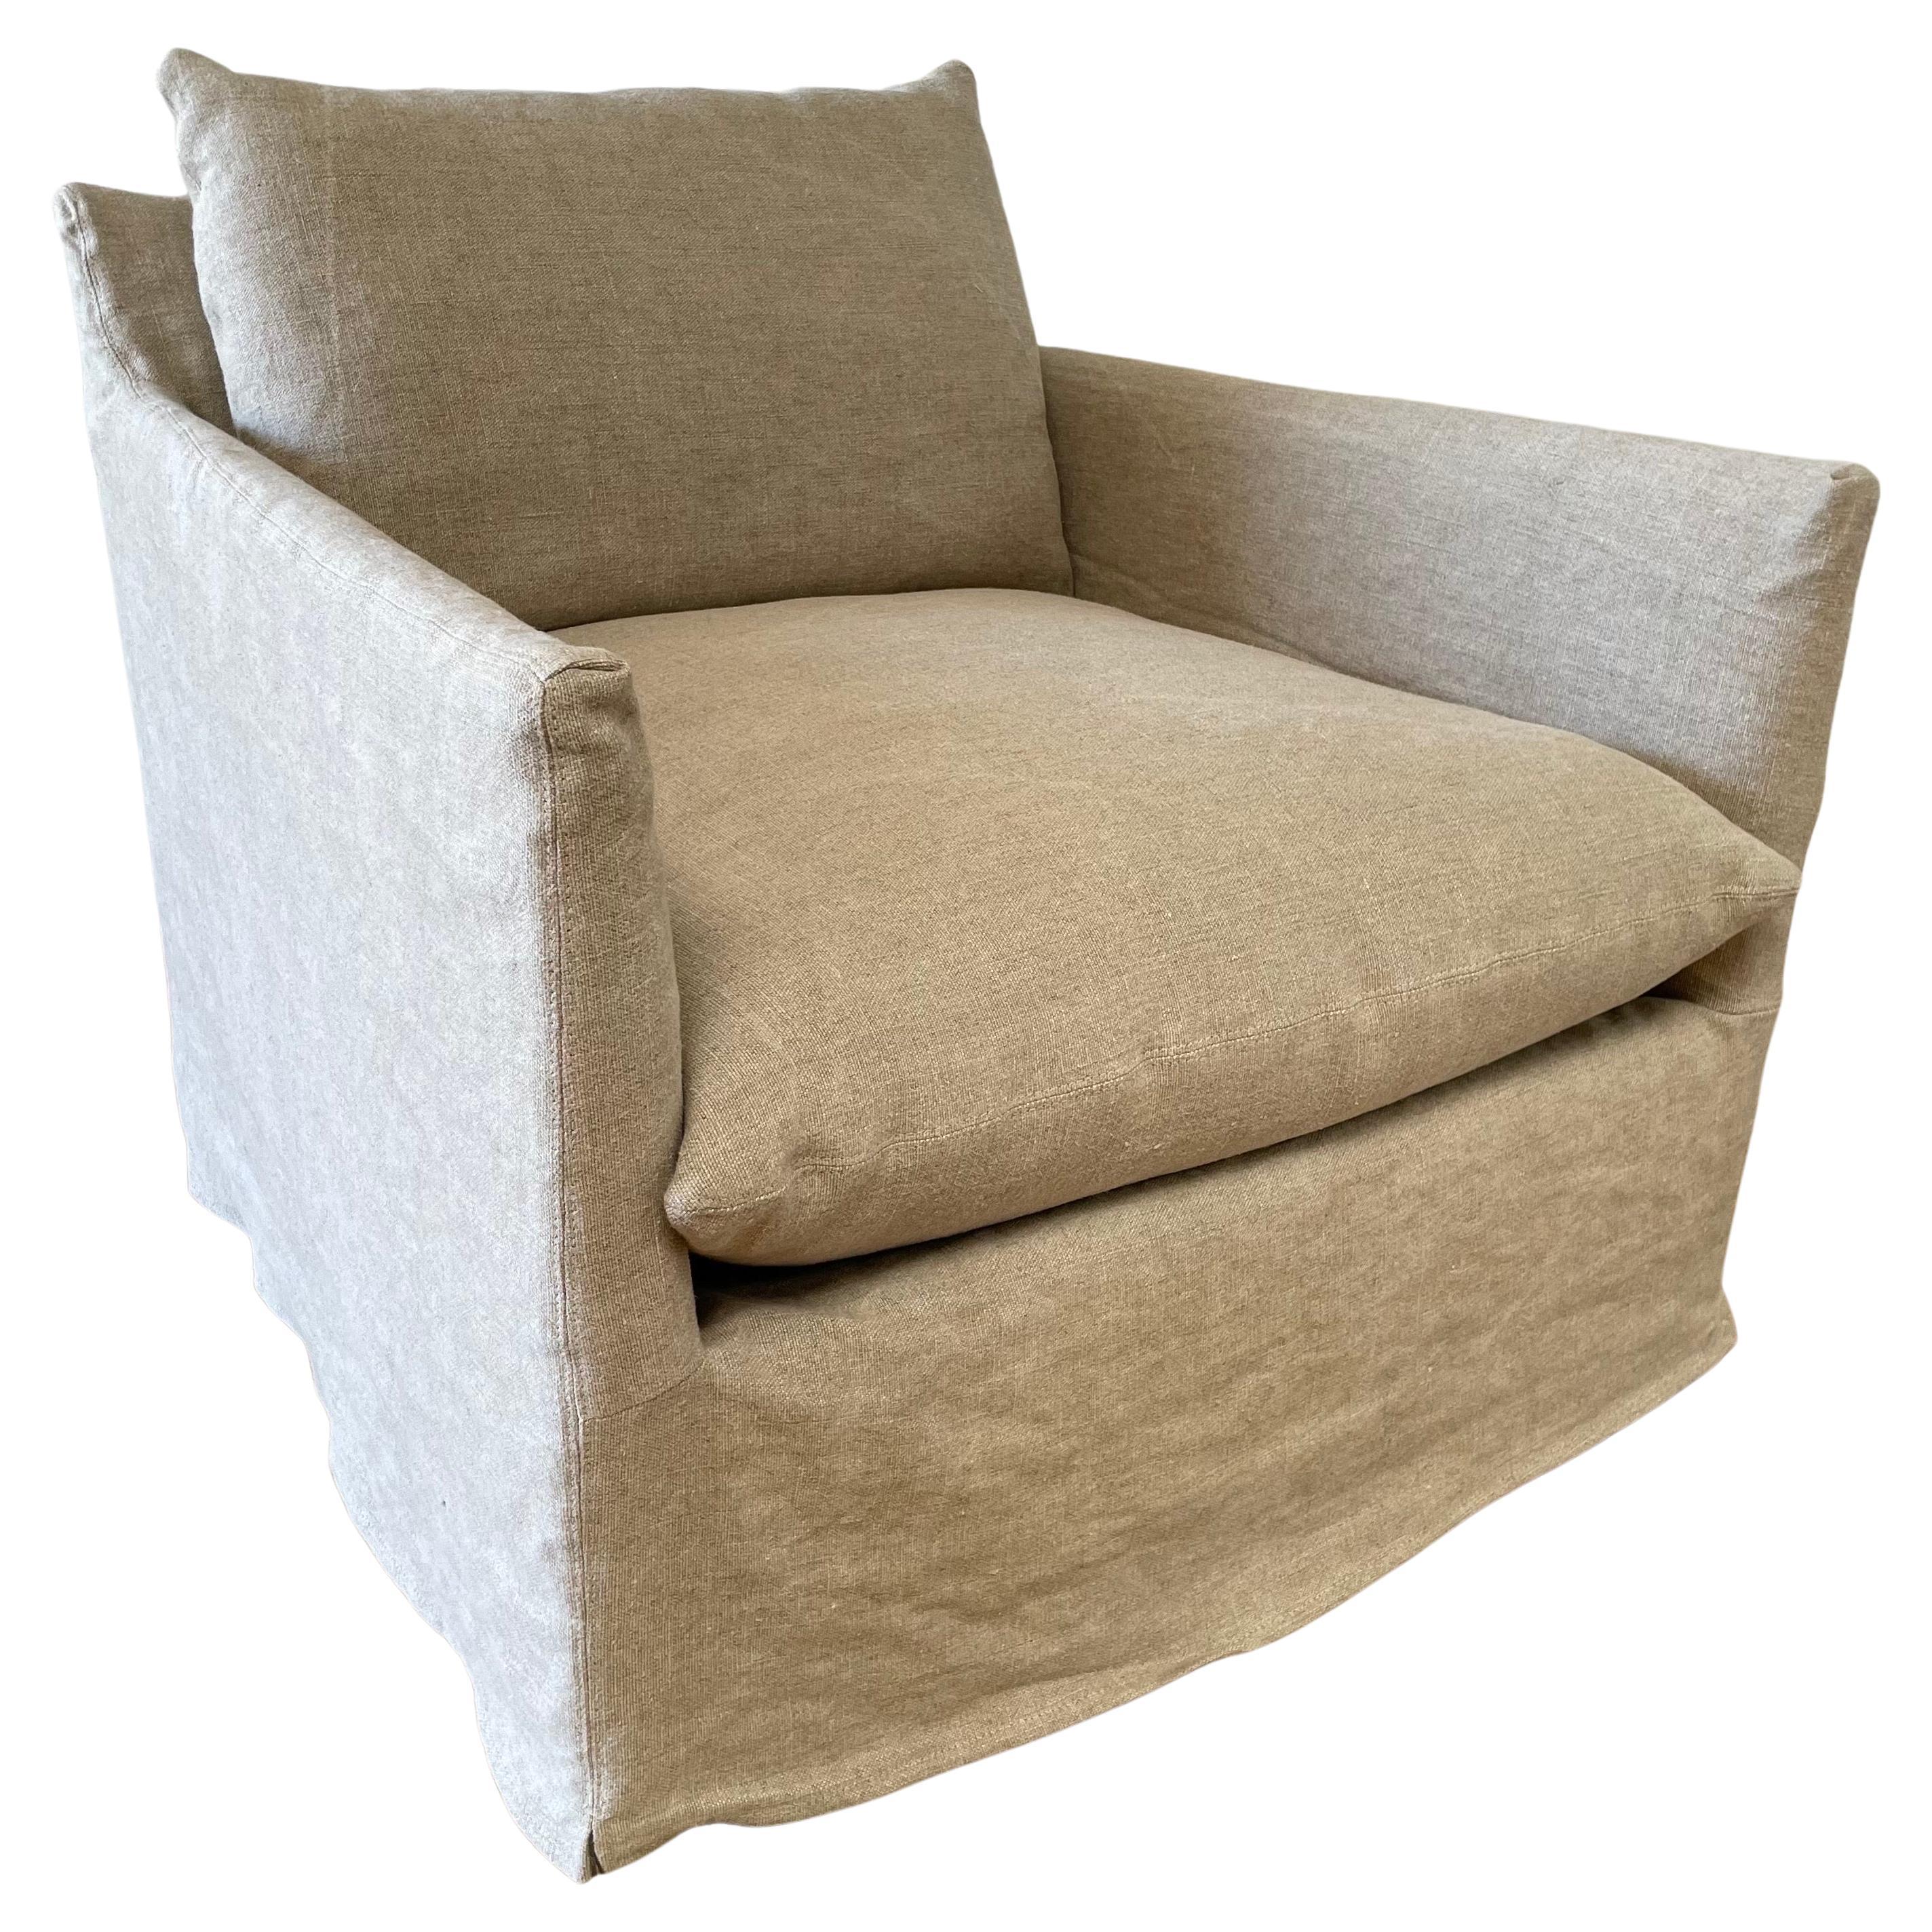 Custom Swivel Chair Slip Covered in a Heavy Flax Stone Washed Linen